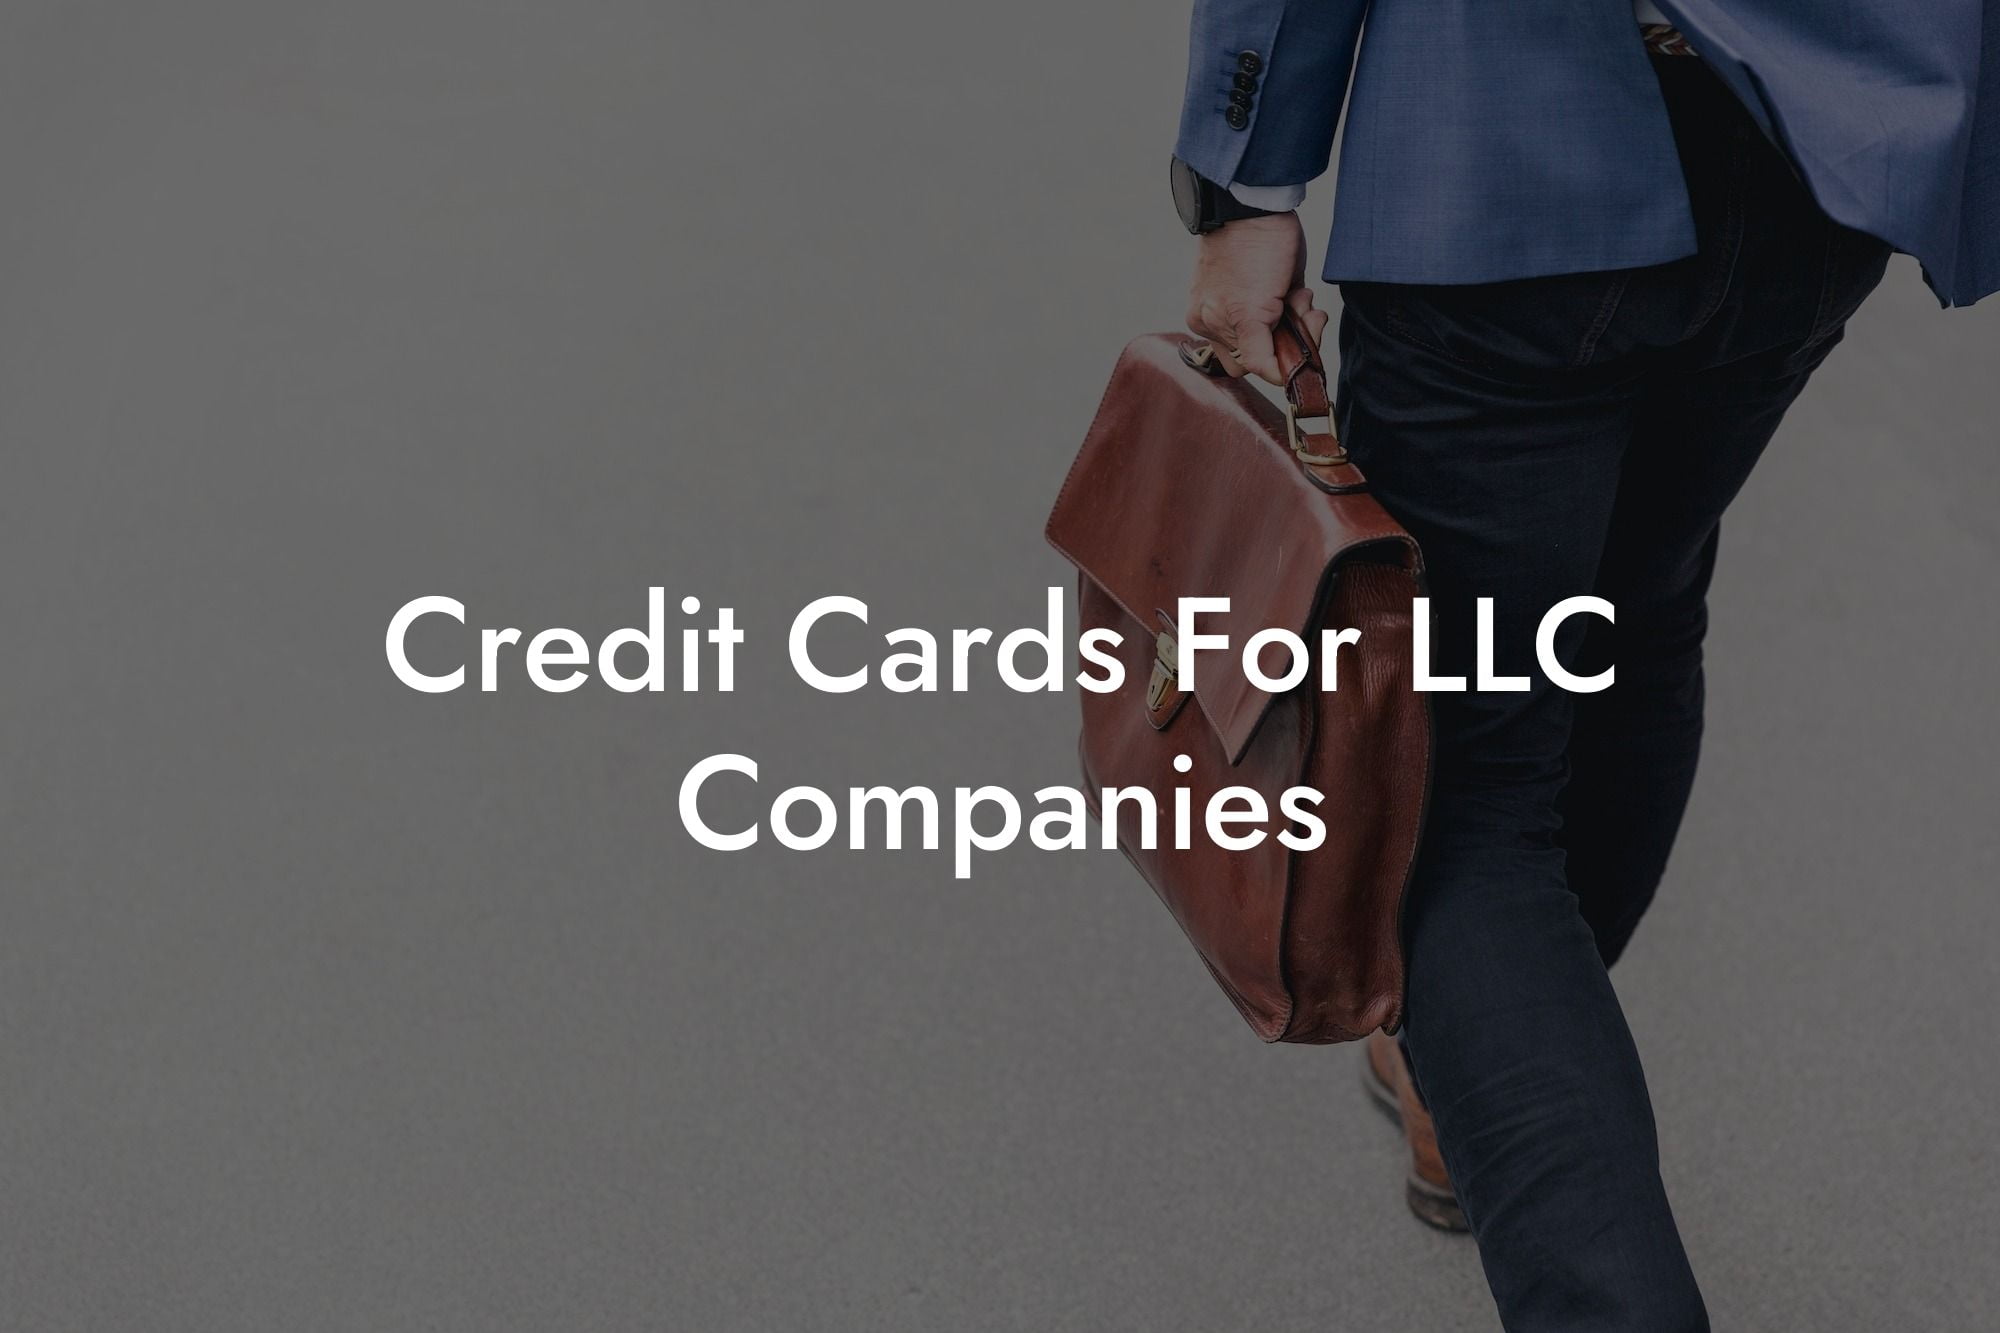 Credit Cards For LLC Companies